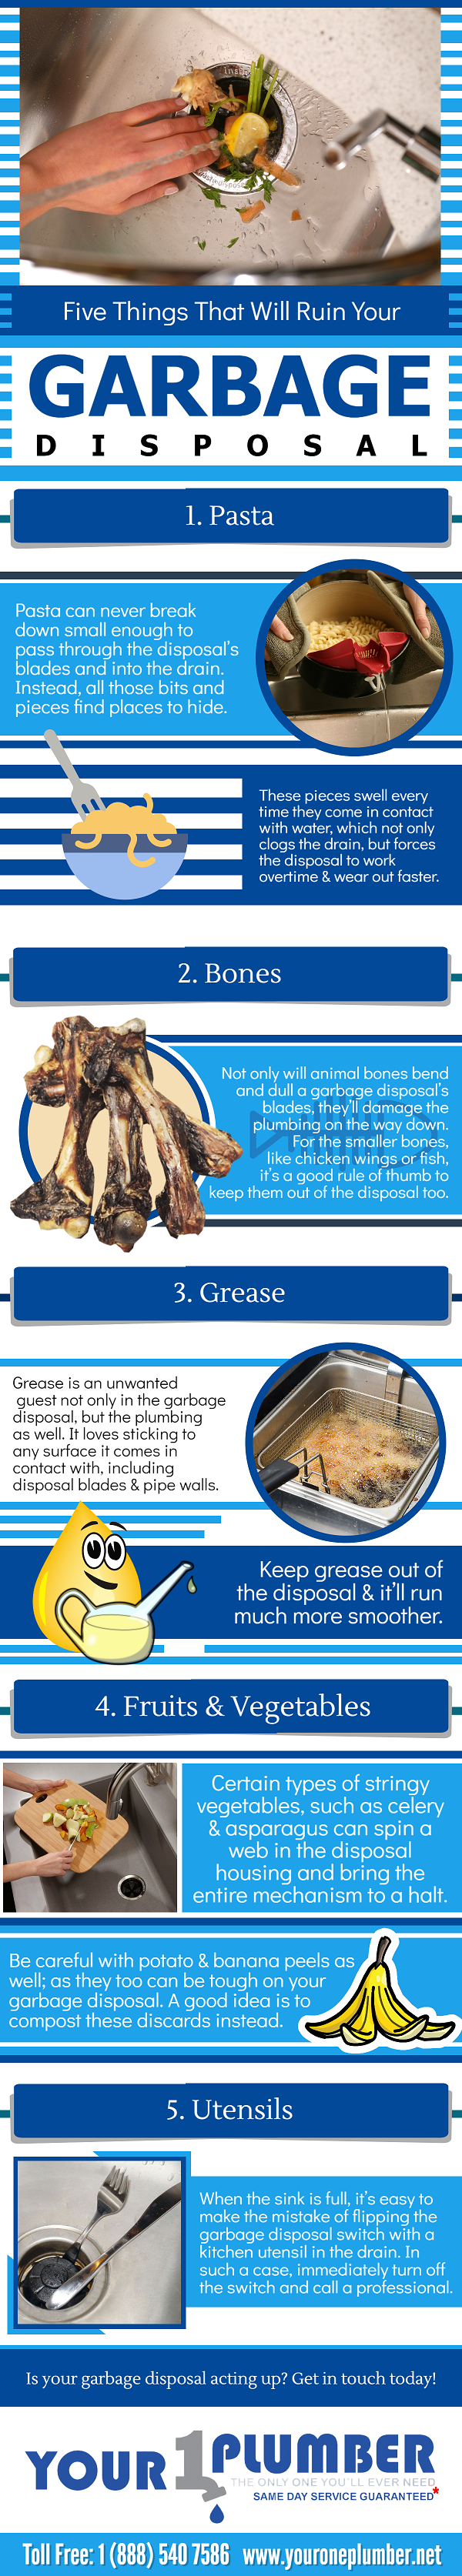 Five Things That Will Ruin Your Garbage Disposal